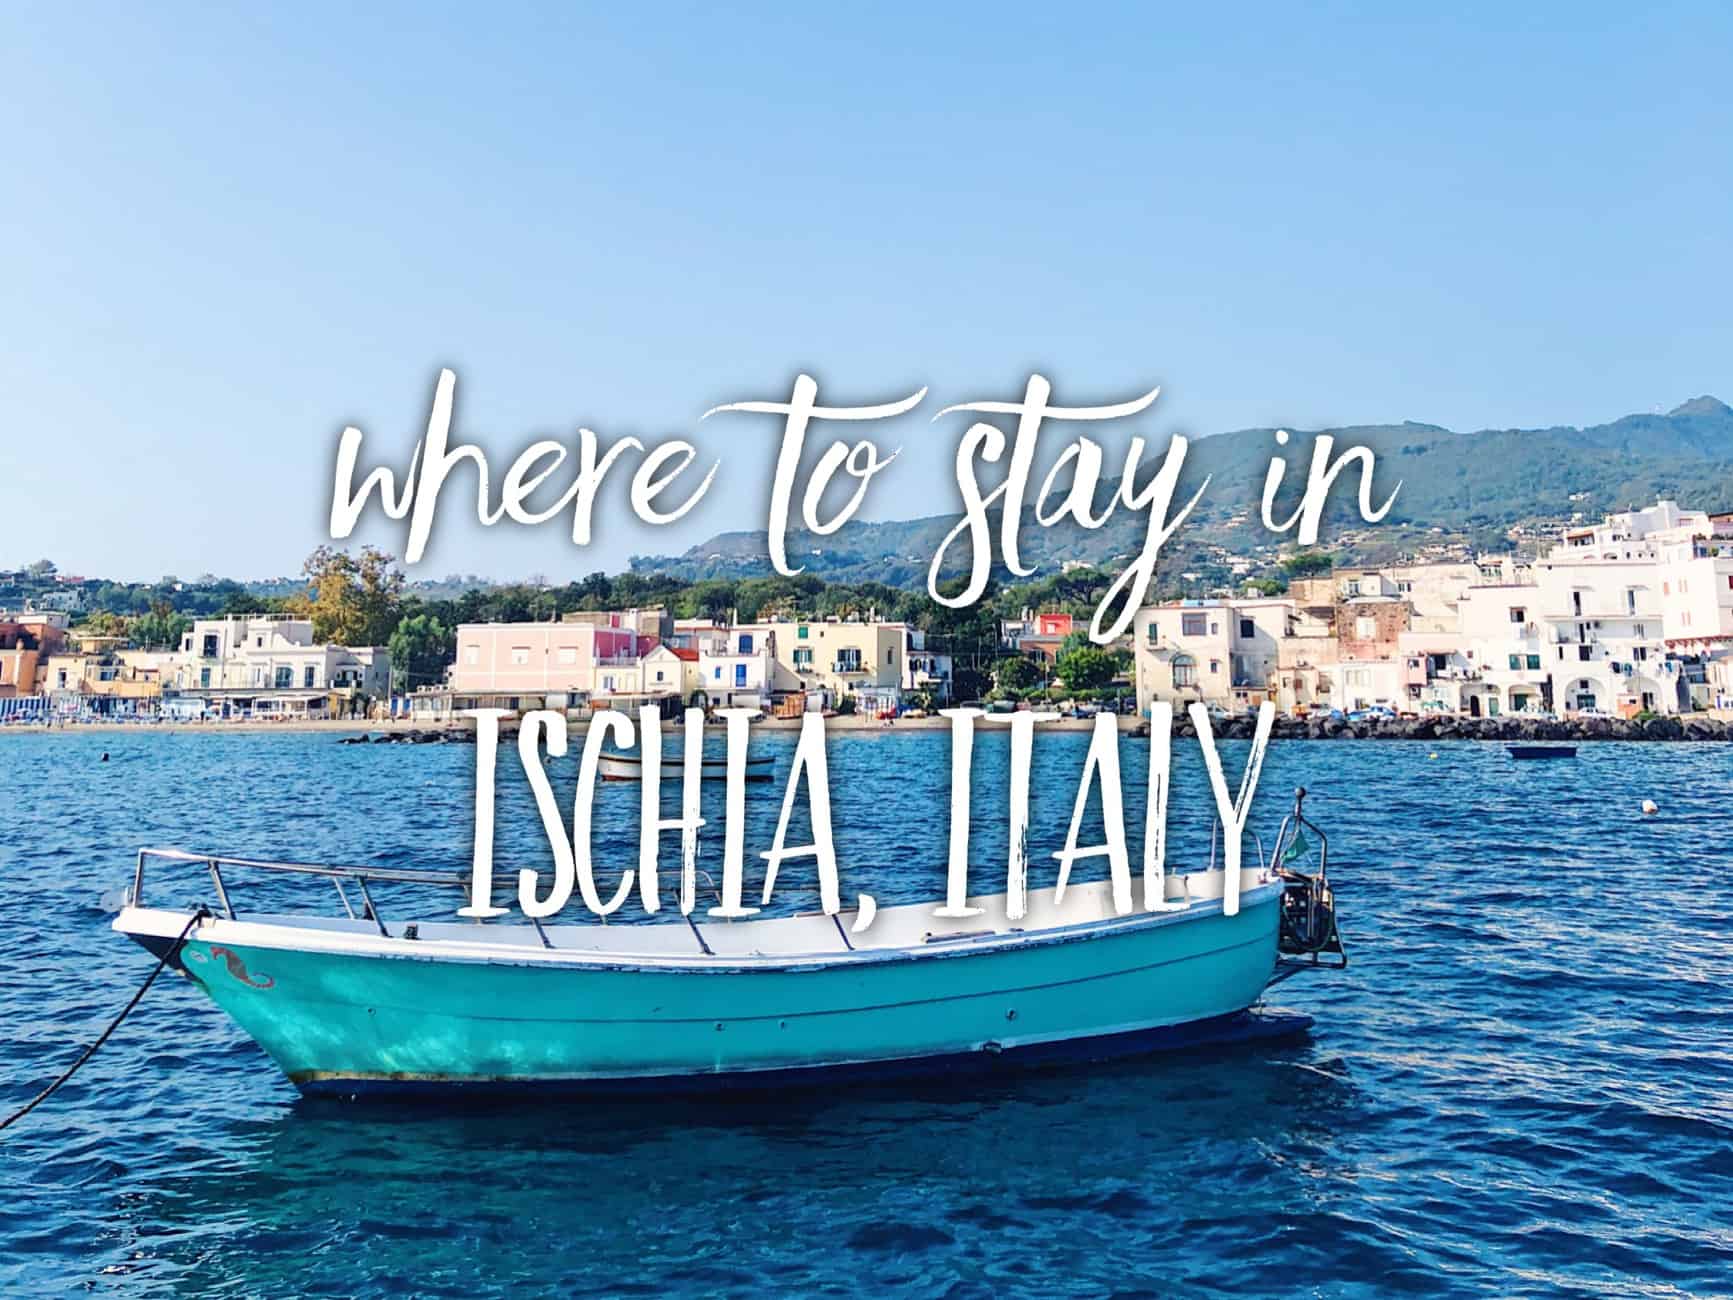 Where to stay in Ischia – best hotels for an unforgettable vacation in Ischia